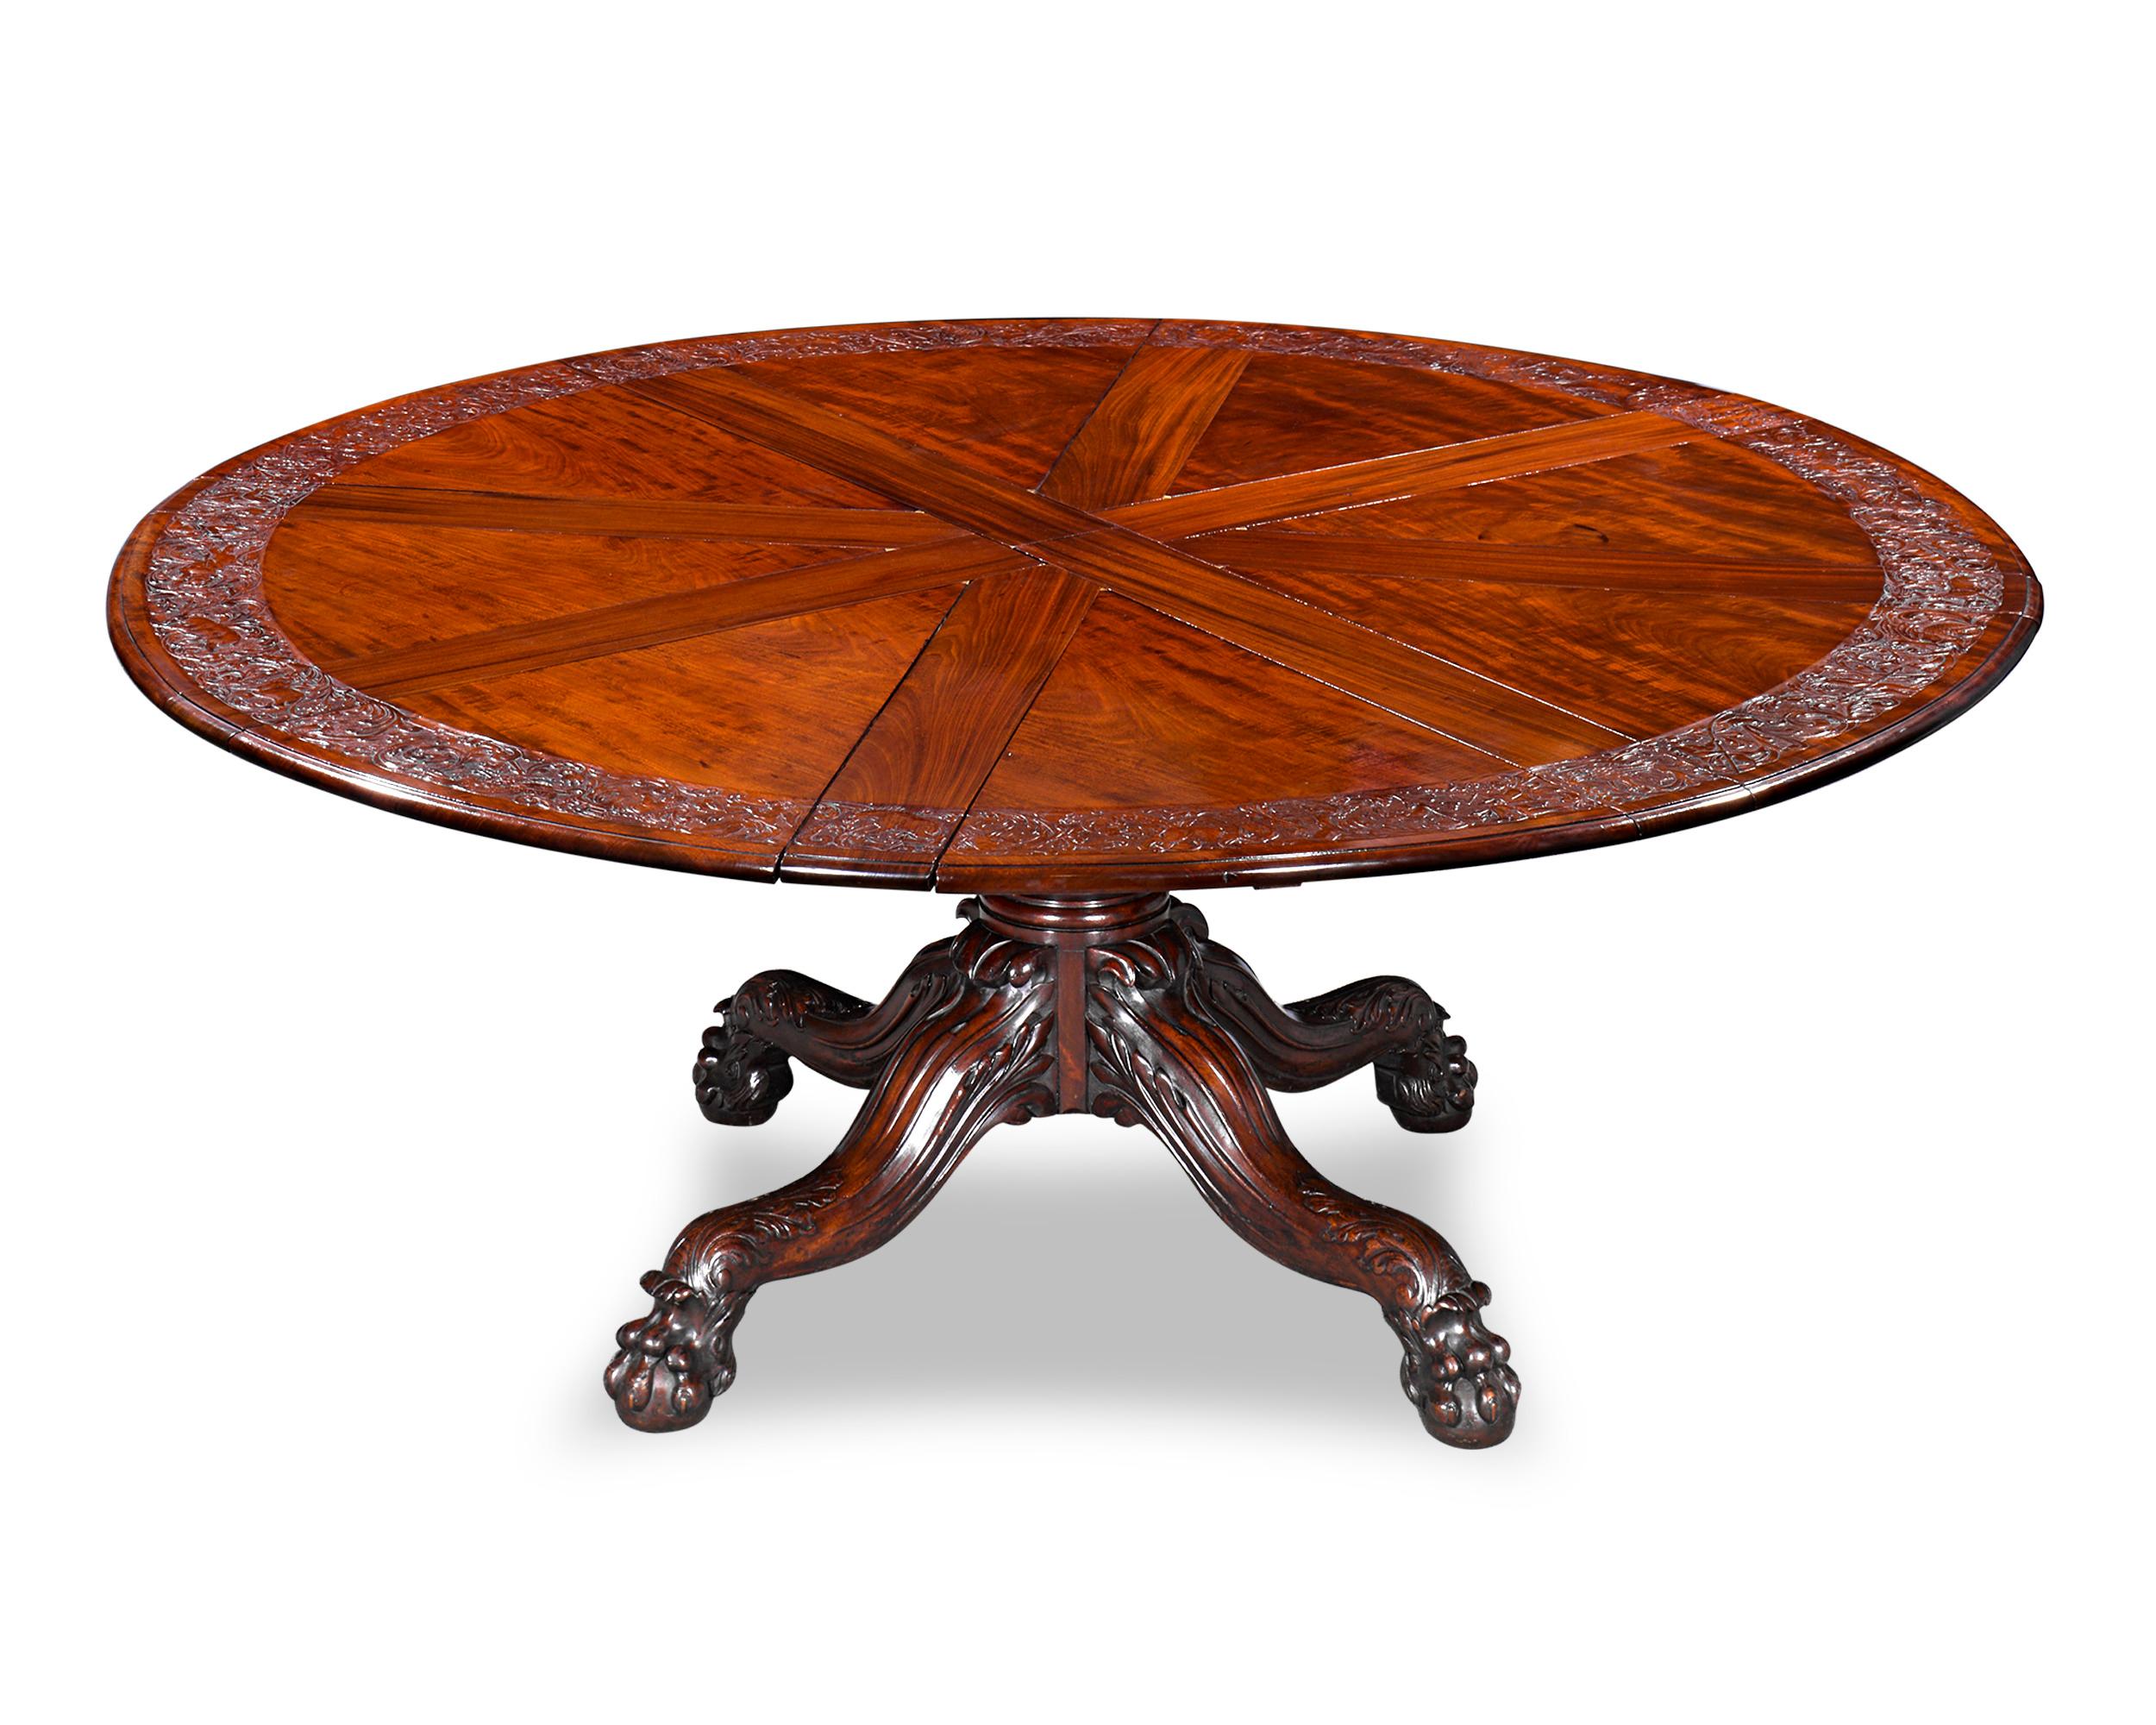 This exceptionally rare circular expanding dining table was designed by Robert Jupe and crafted by the English cabinetmakers Johnstone & Jeanes, successors to Johnstone, Jupe & Co. One of only a handful known from the firm, this table illustrates